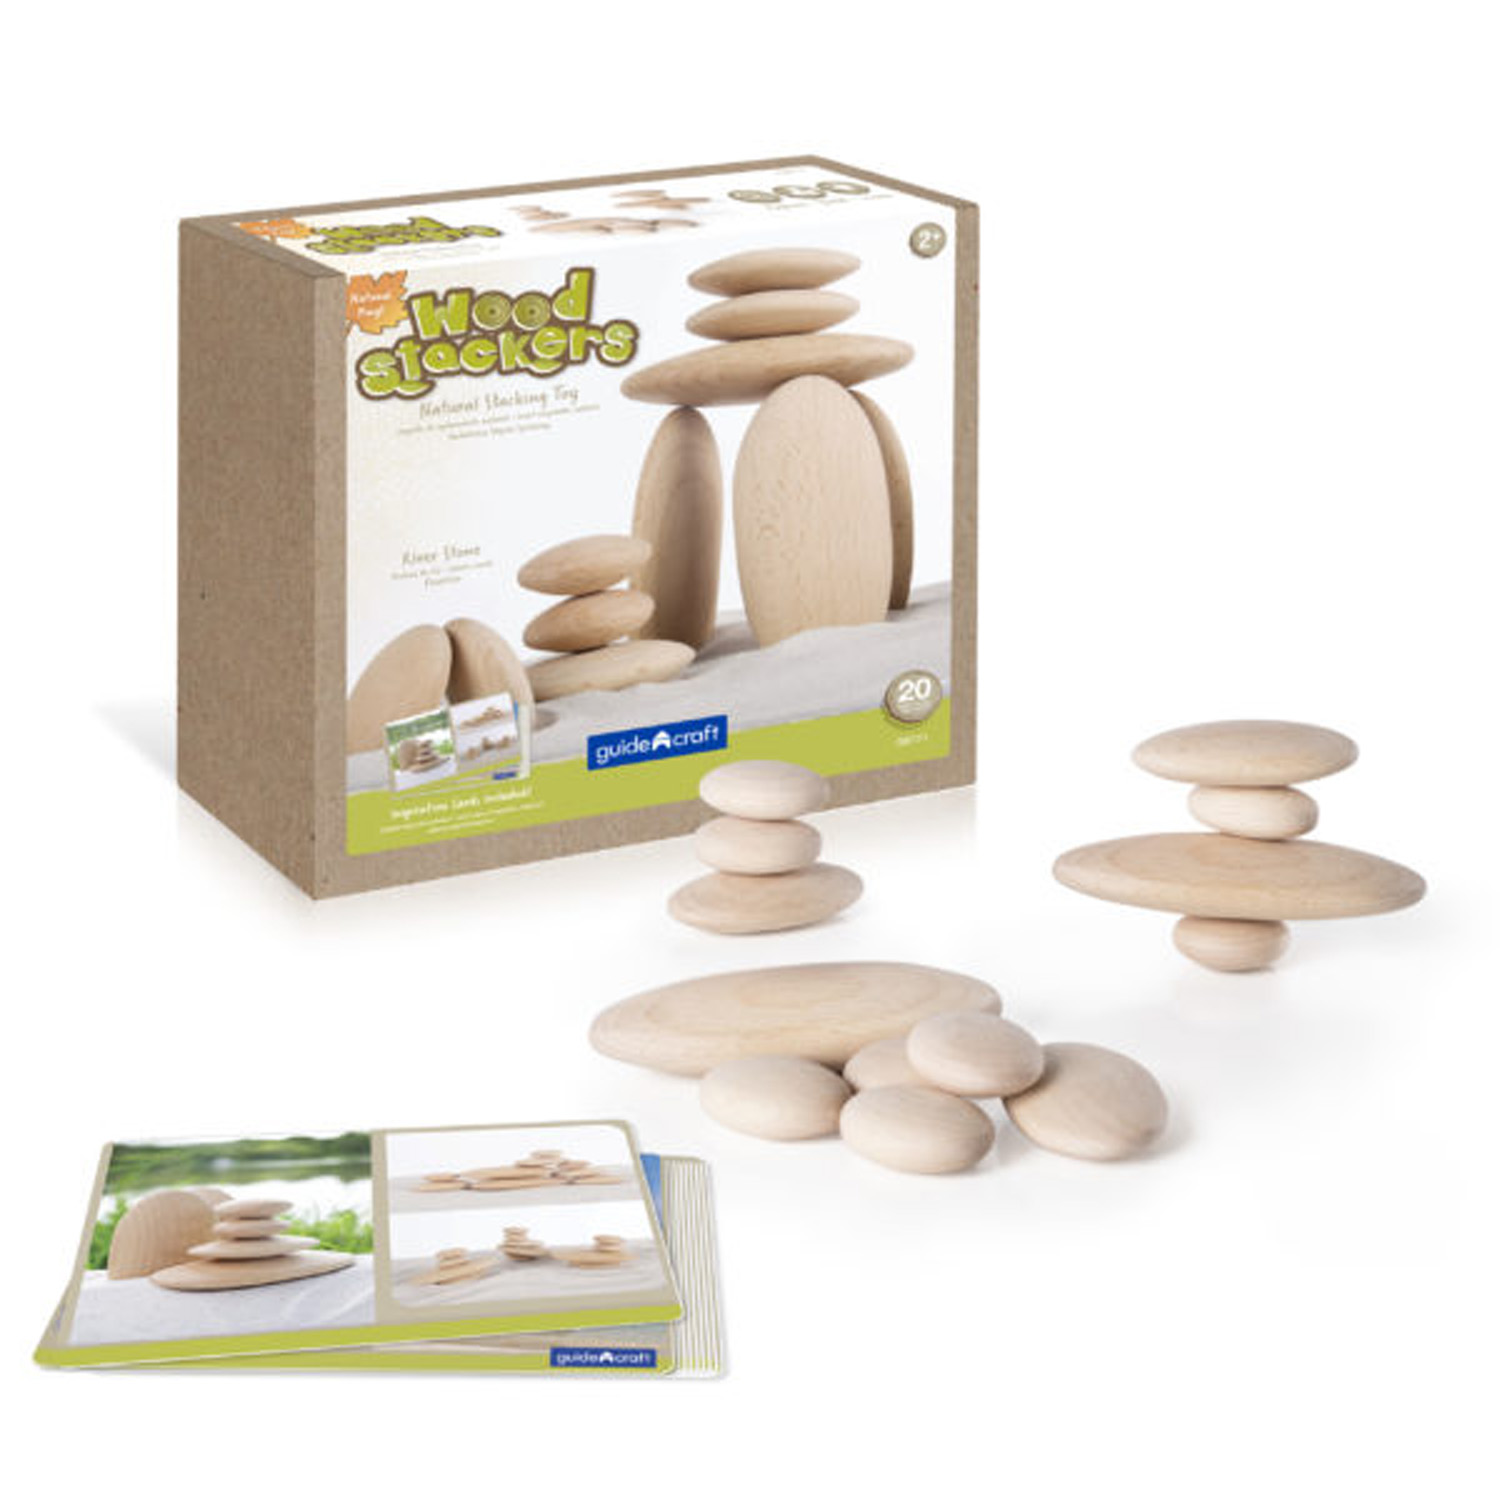 Guidecraft Wood Stackers - River Stones, 20 Pieces